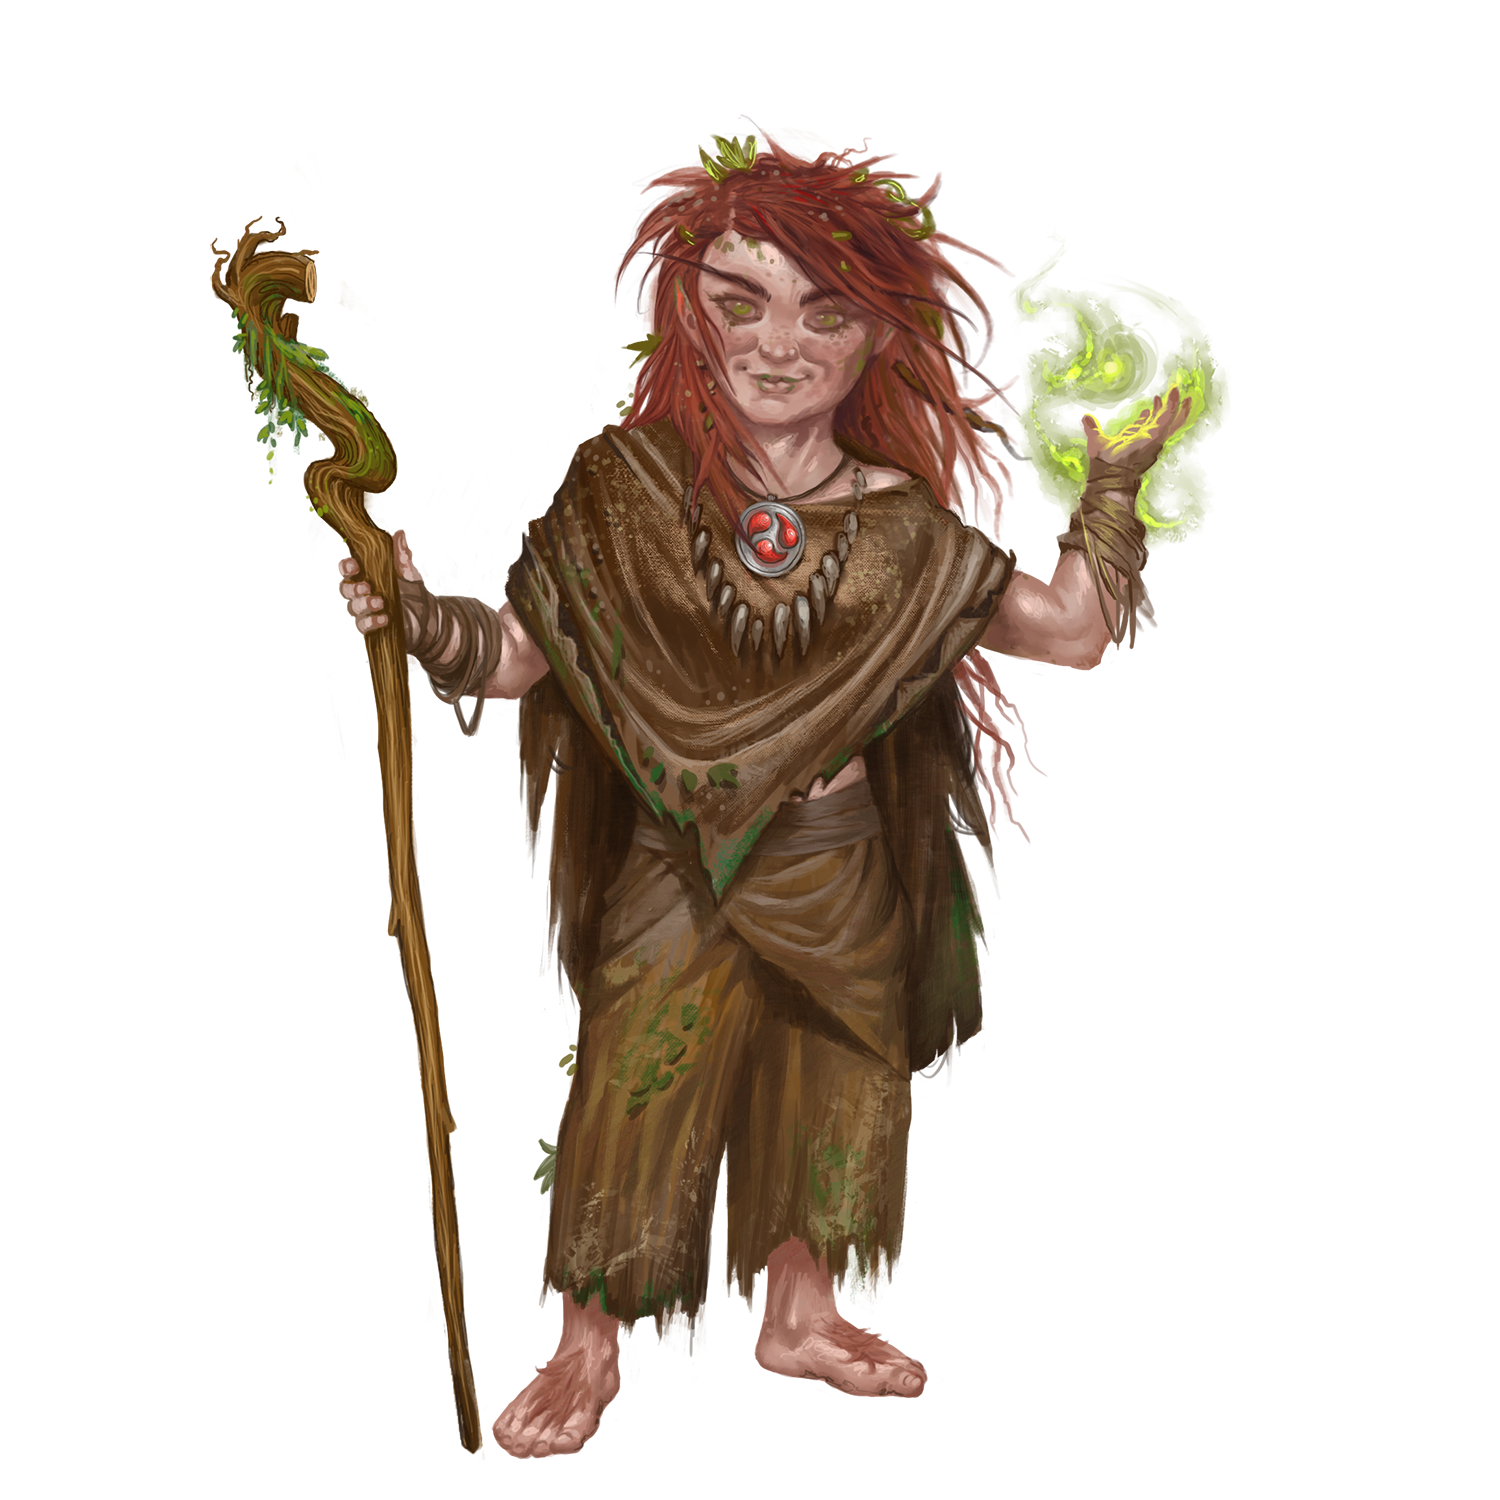 Ha female Uhlam halfling. She has light skin with freckles and a rosy completion from having spent long days out in the wild. Her hair is reddish/brown, and it runs a bit wild with twigs, leaves, and maybe even a small vine wrapped up inside (some of it looks accidental, but a few bits might be intentionally placed). She’s barefoot, wearing a rough spun tunic and simple breeches that mostly have earth tones with green highlights and leaf patterning. Overall, it looks like she might have rolled around in a bush a bit. Around her neck, she has a wolf-tooth pendant. She holds a gnarled walking staff in one hand, while mystical green runes surround her other hand, as if she’s casting a spell. Finally, she has a mystical symbol on her neck, like three comets trailing each other. This symbol is identical to the one on her wolf companion.